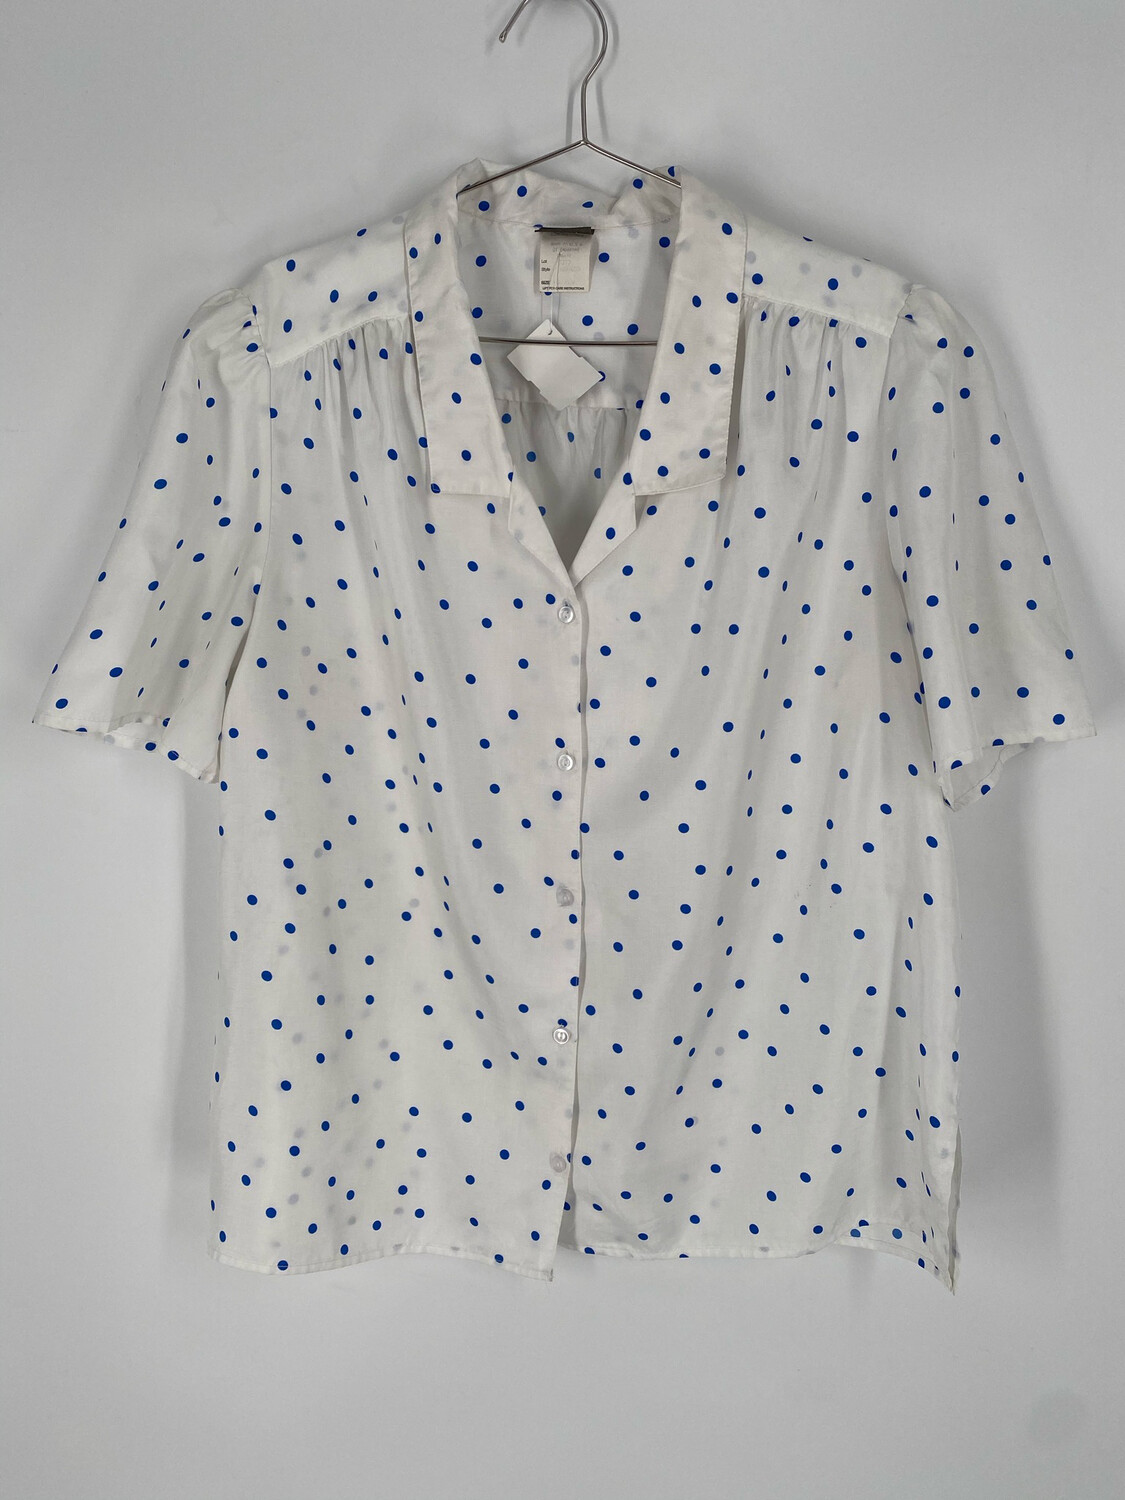 Pykettes Polka Dot Short Sleeve Button Up Size 40/20W